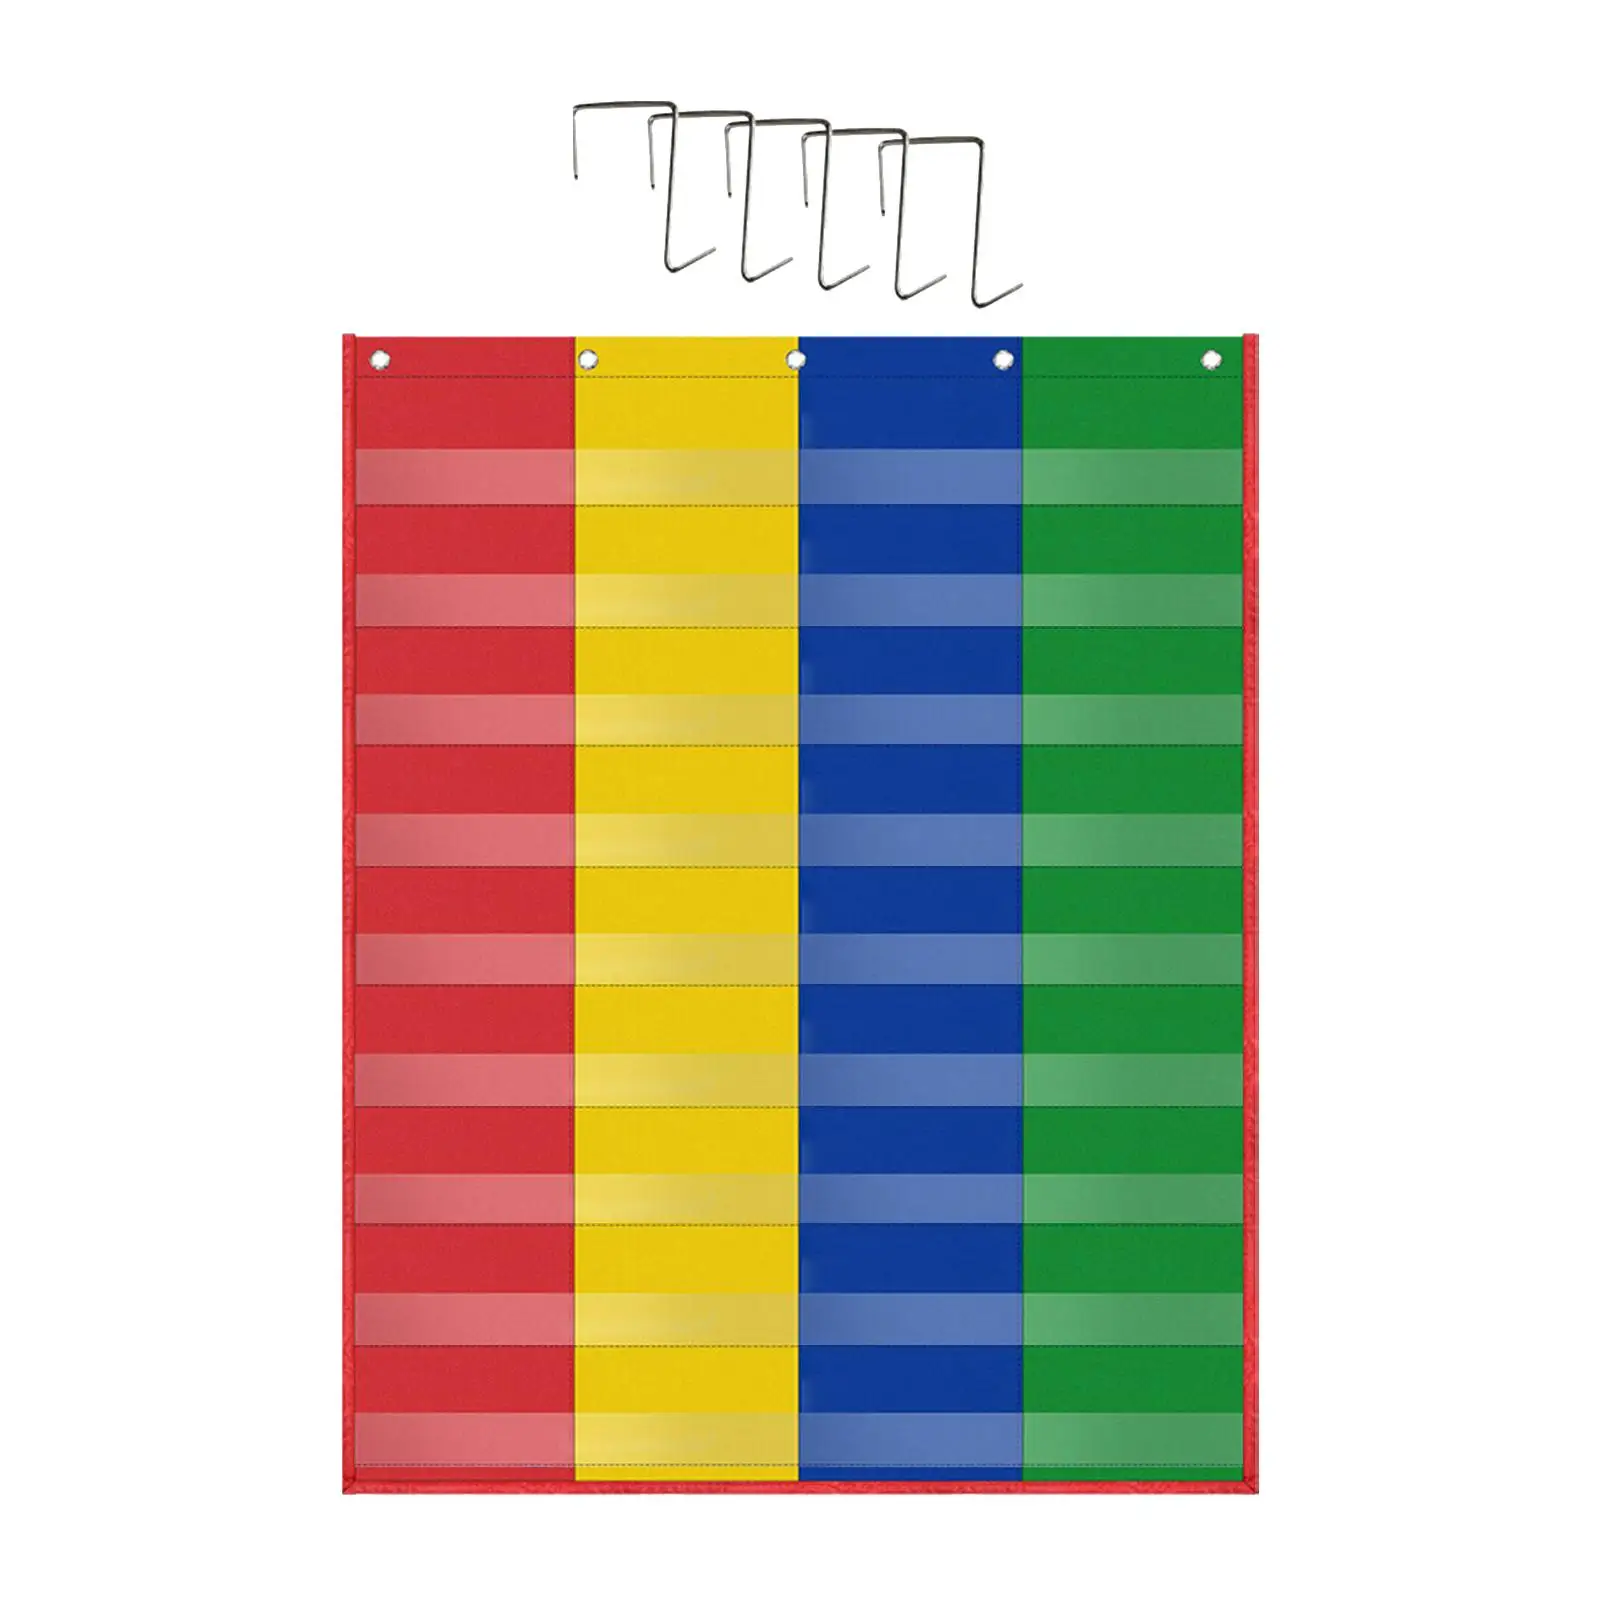 Classroom Pocket Chart with 5 Hooks Wall Hanging Reusable Teaching Pocket Chart for Activity Learning Center Classroom Kids Home